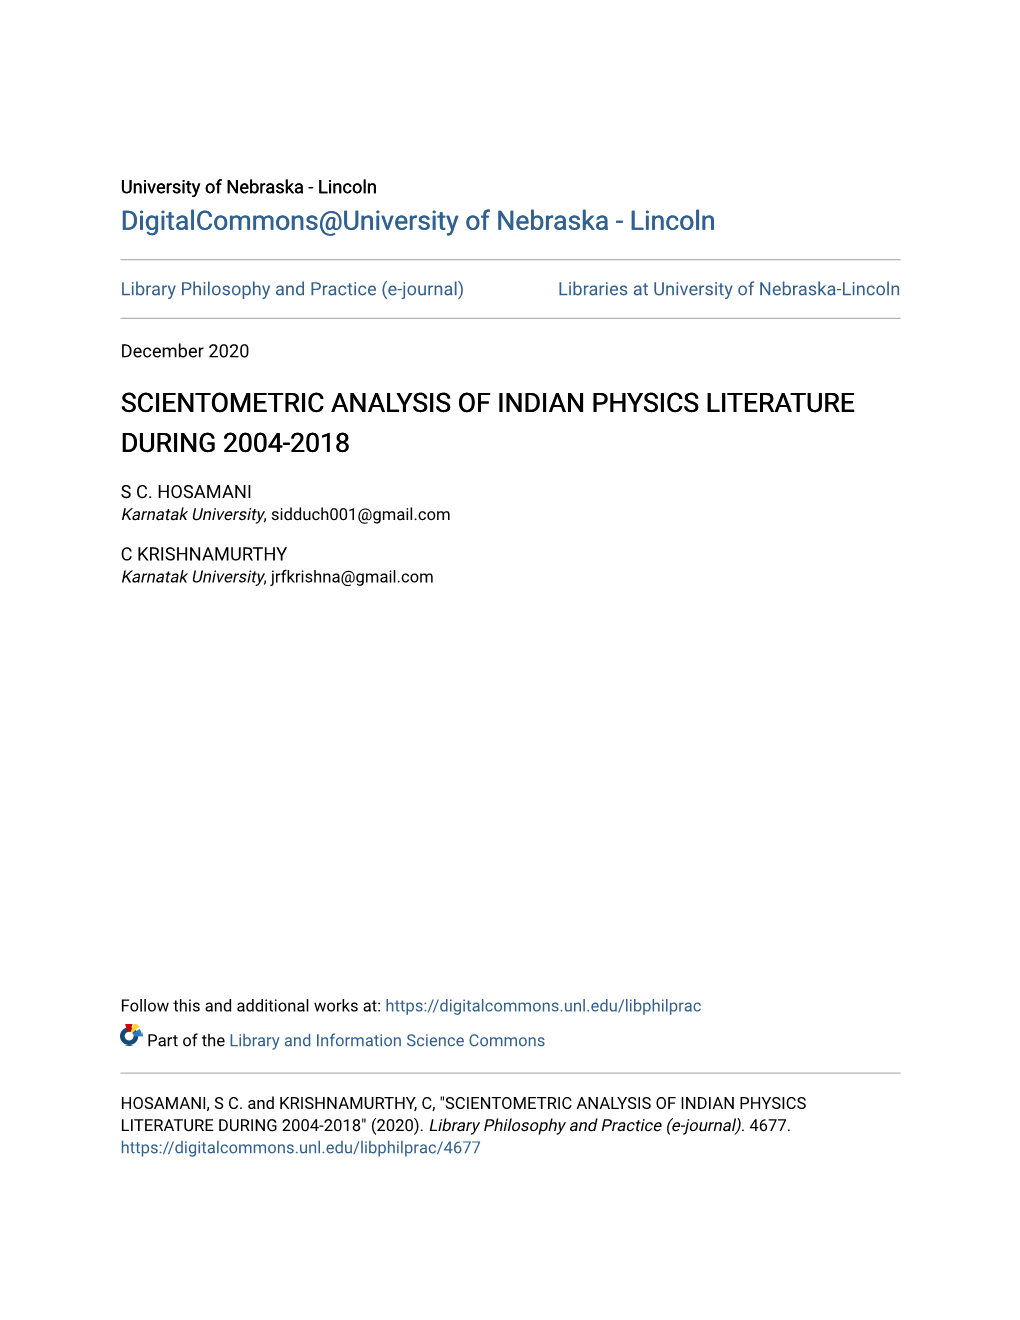 Scientometric Analysis of Indian Physics Literature During 2004-2018